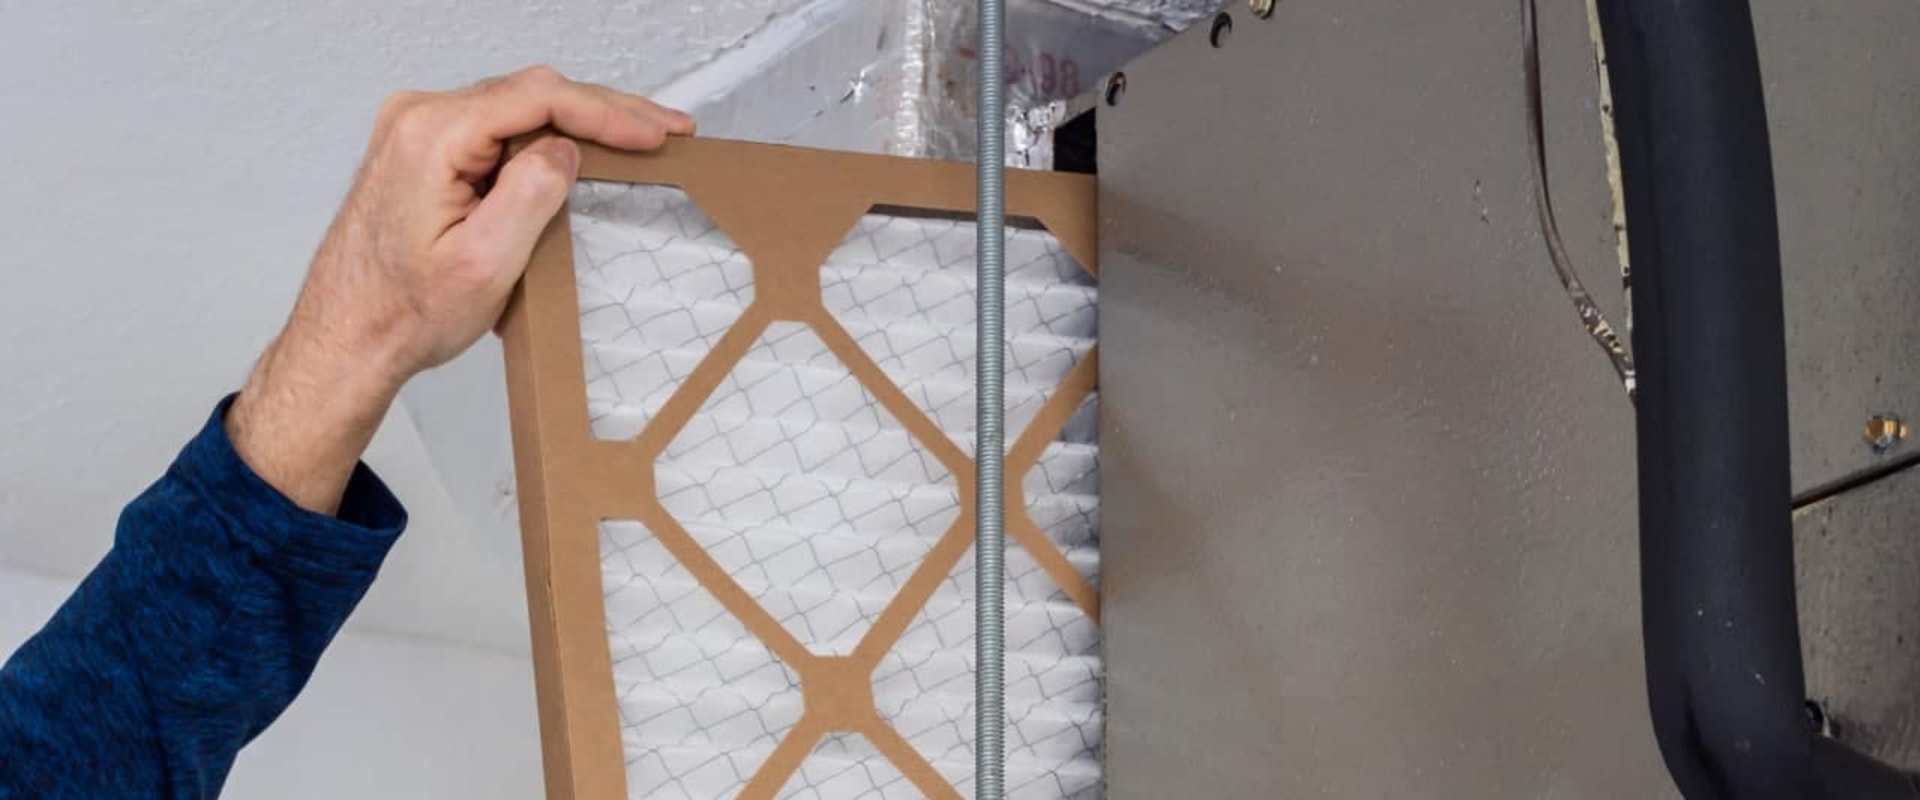 Common Problems with an Air Filter 20x25x4: How to Identify and Fix Them